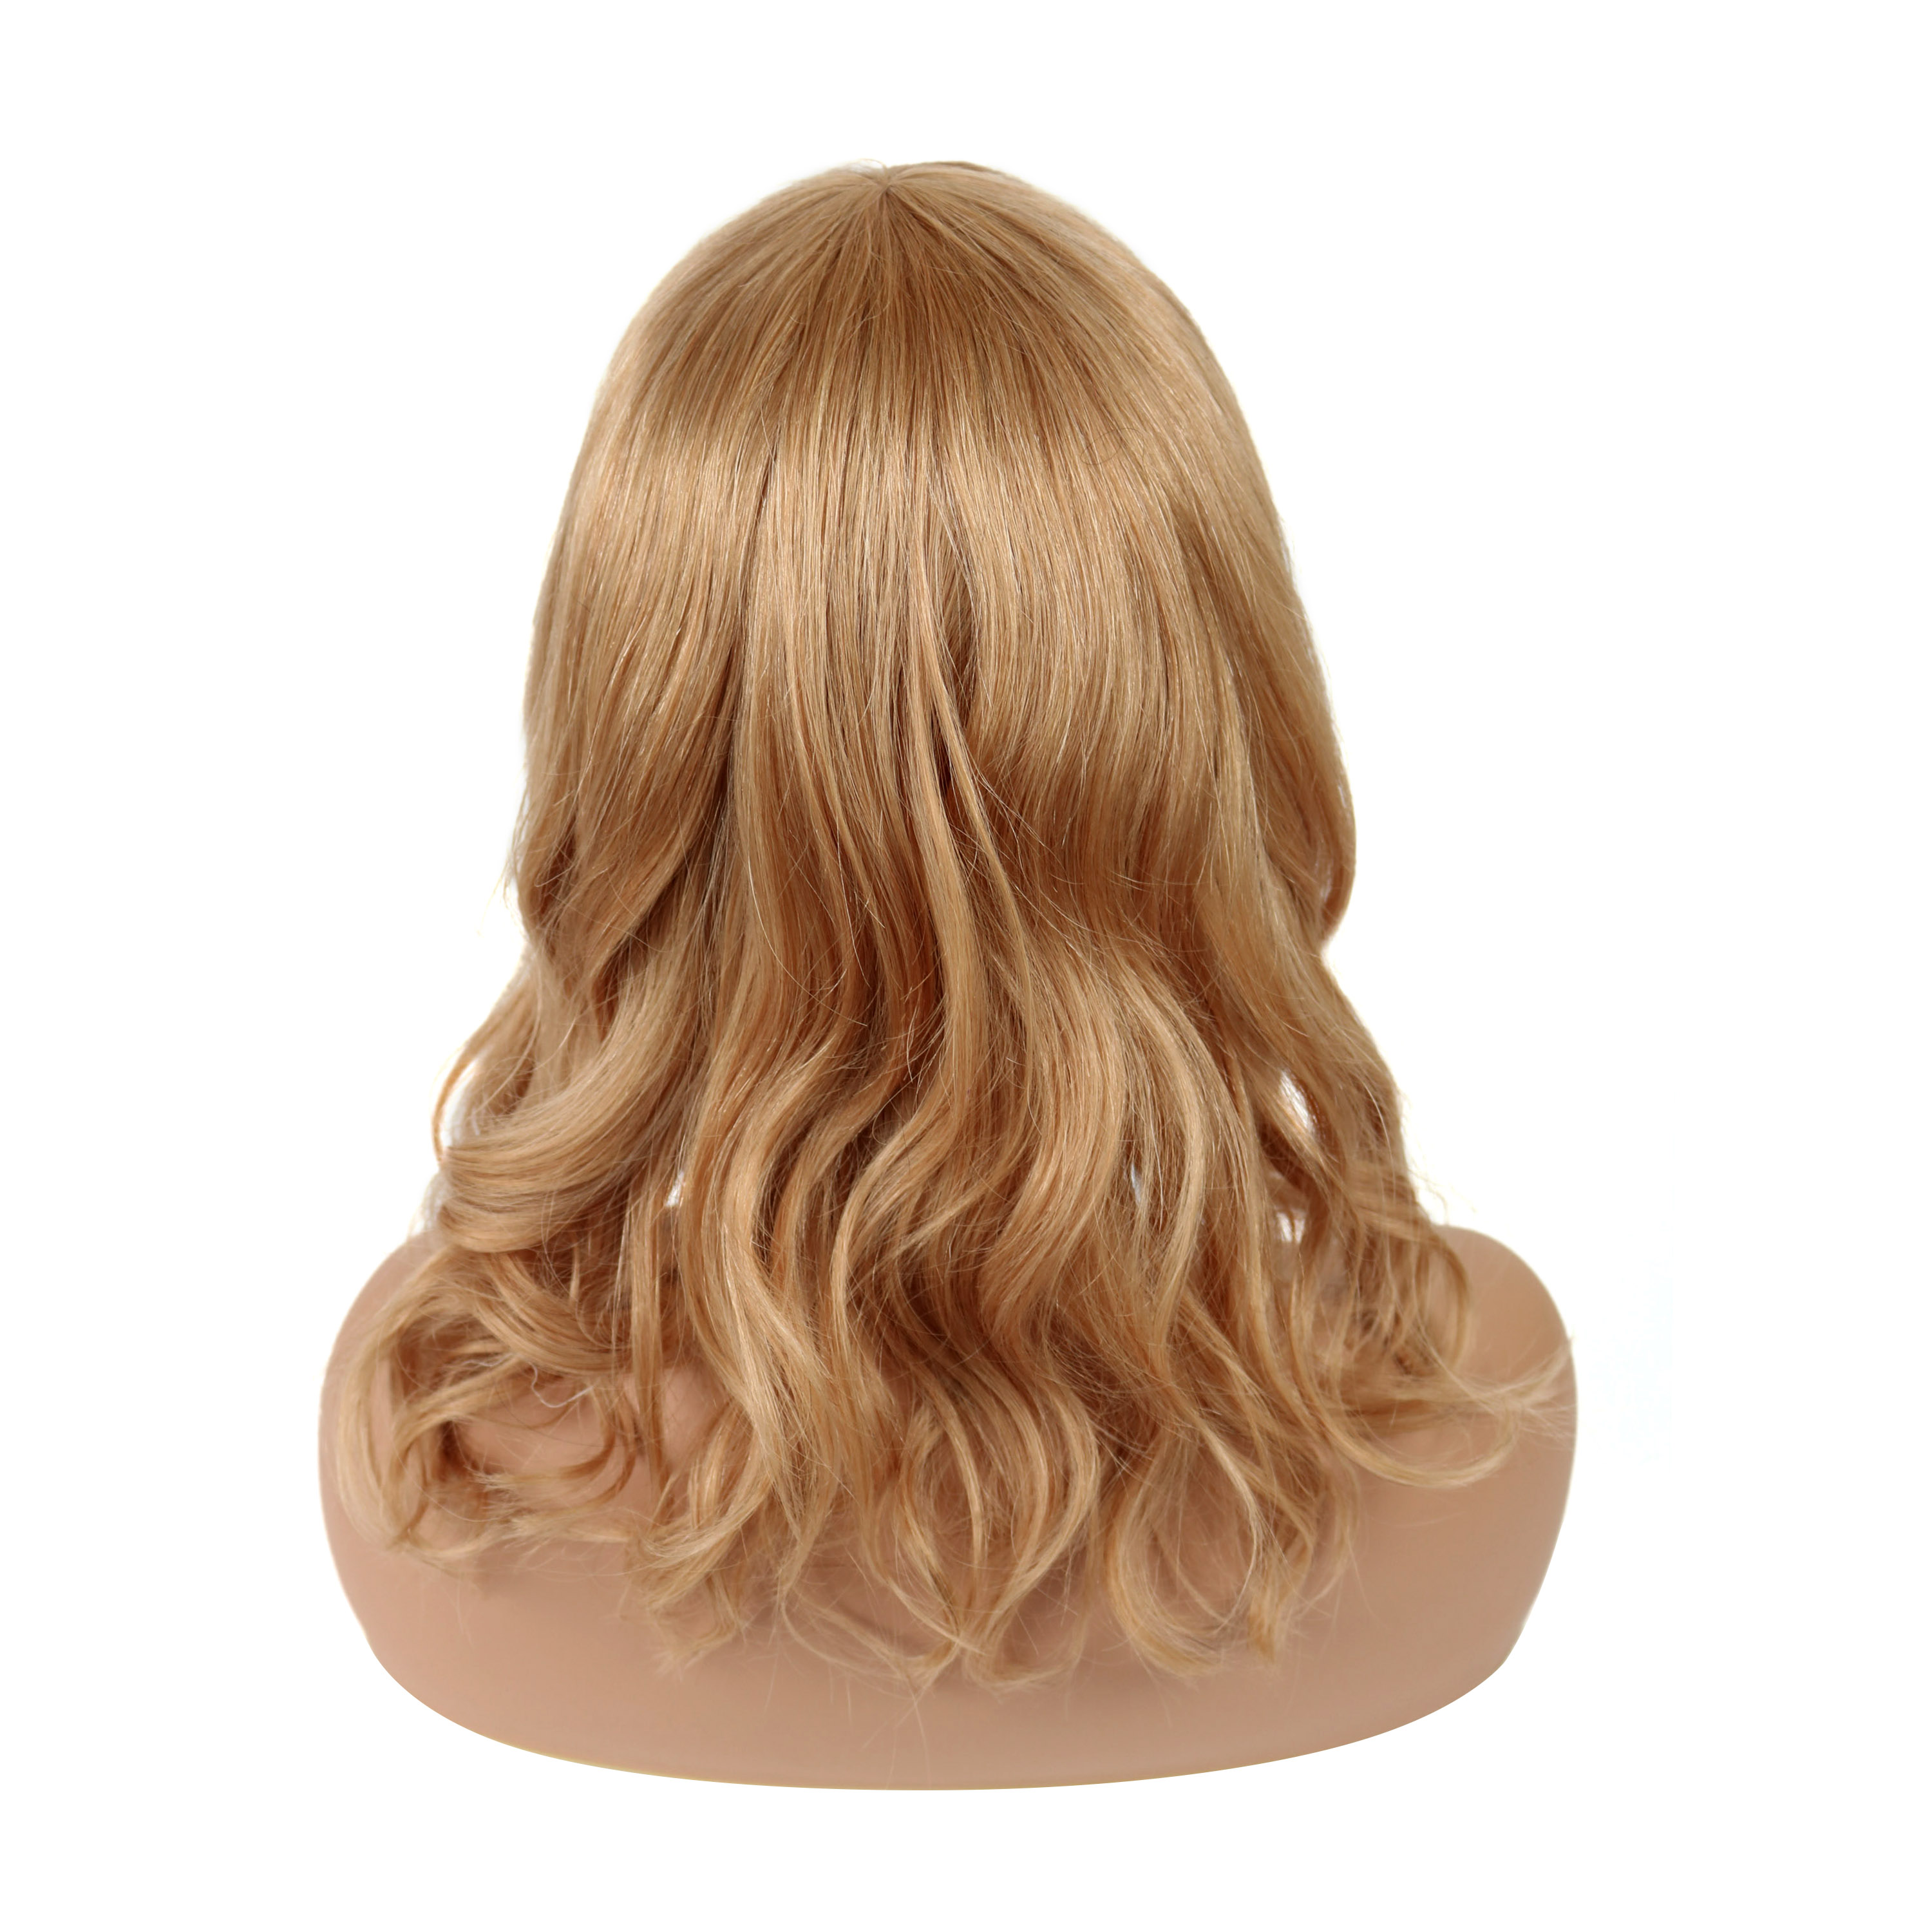 Wavy Human Hair Capless 120% 16 Inches Wigs With Full Bangs